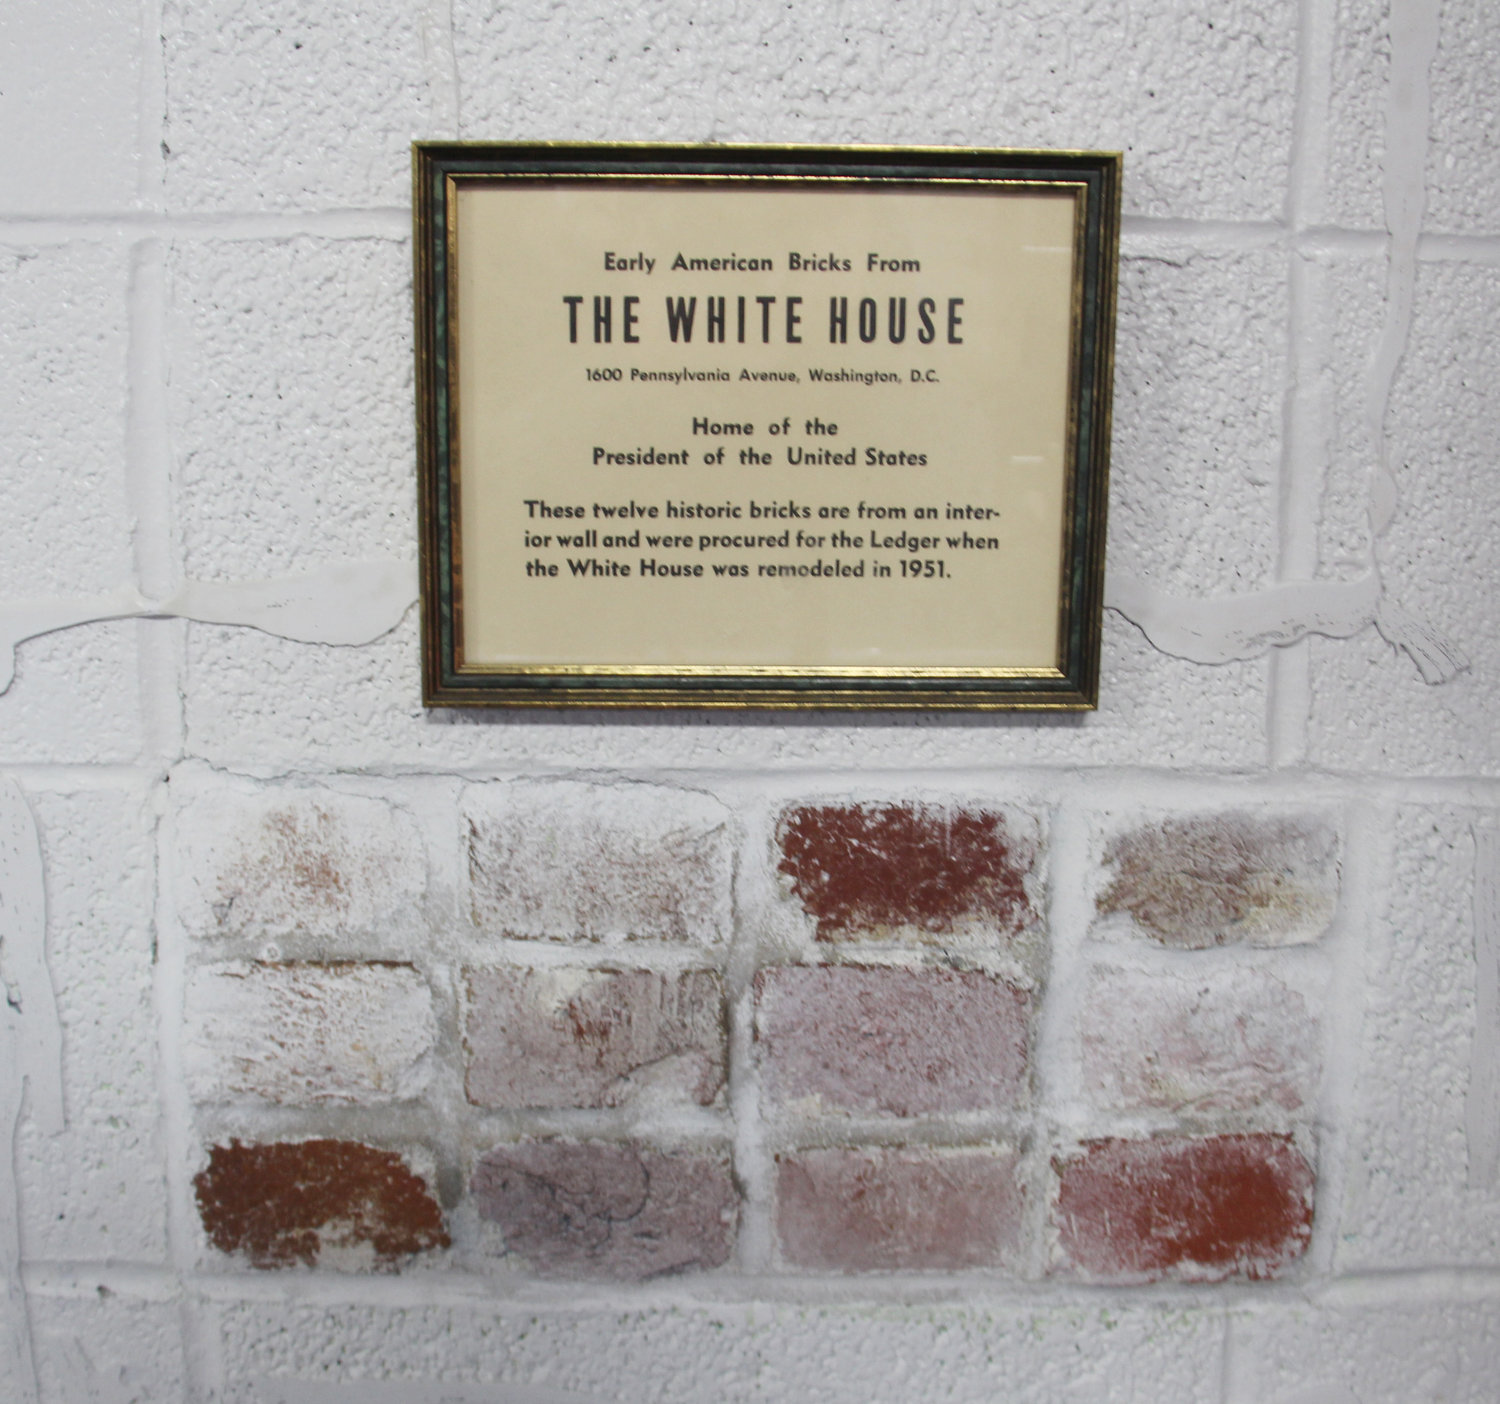 One of the most unique features of the building perseveres as a testament to the building’s rich history. Incorporated into its structure, these bricks were originally part of The White House - yes, THE White House - in Washington D.C.